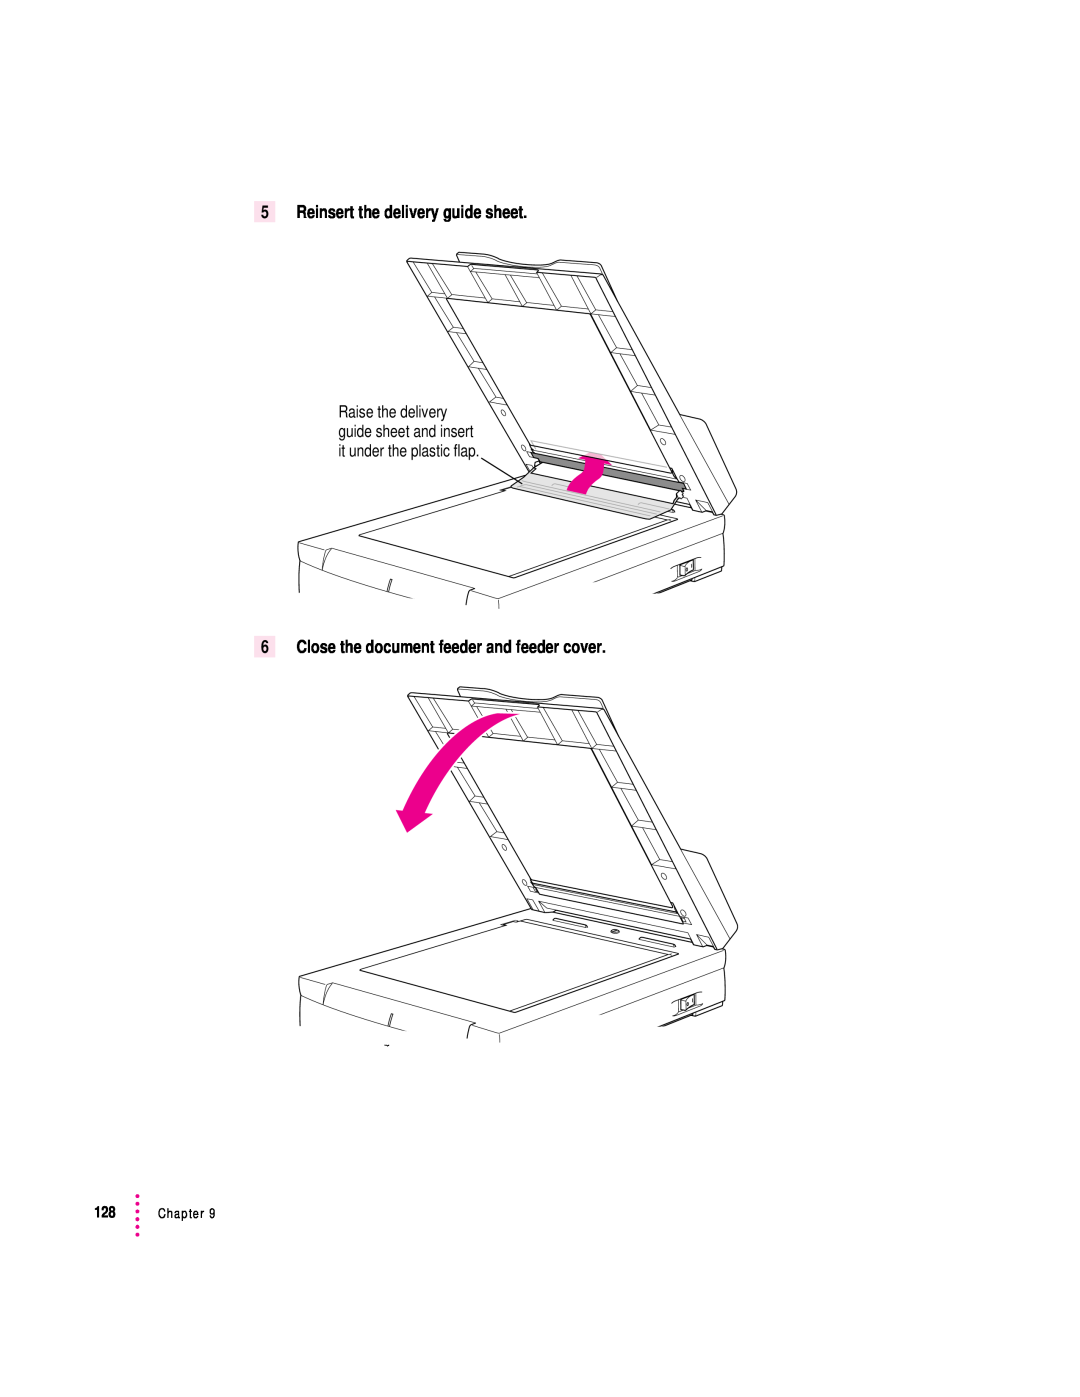 Apple 627, 1230 user manual Reinsert the delivery guide sheet, Close the document feeder and feeder cover, Chapter 